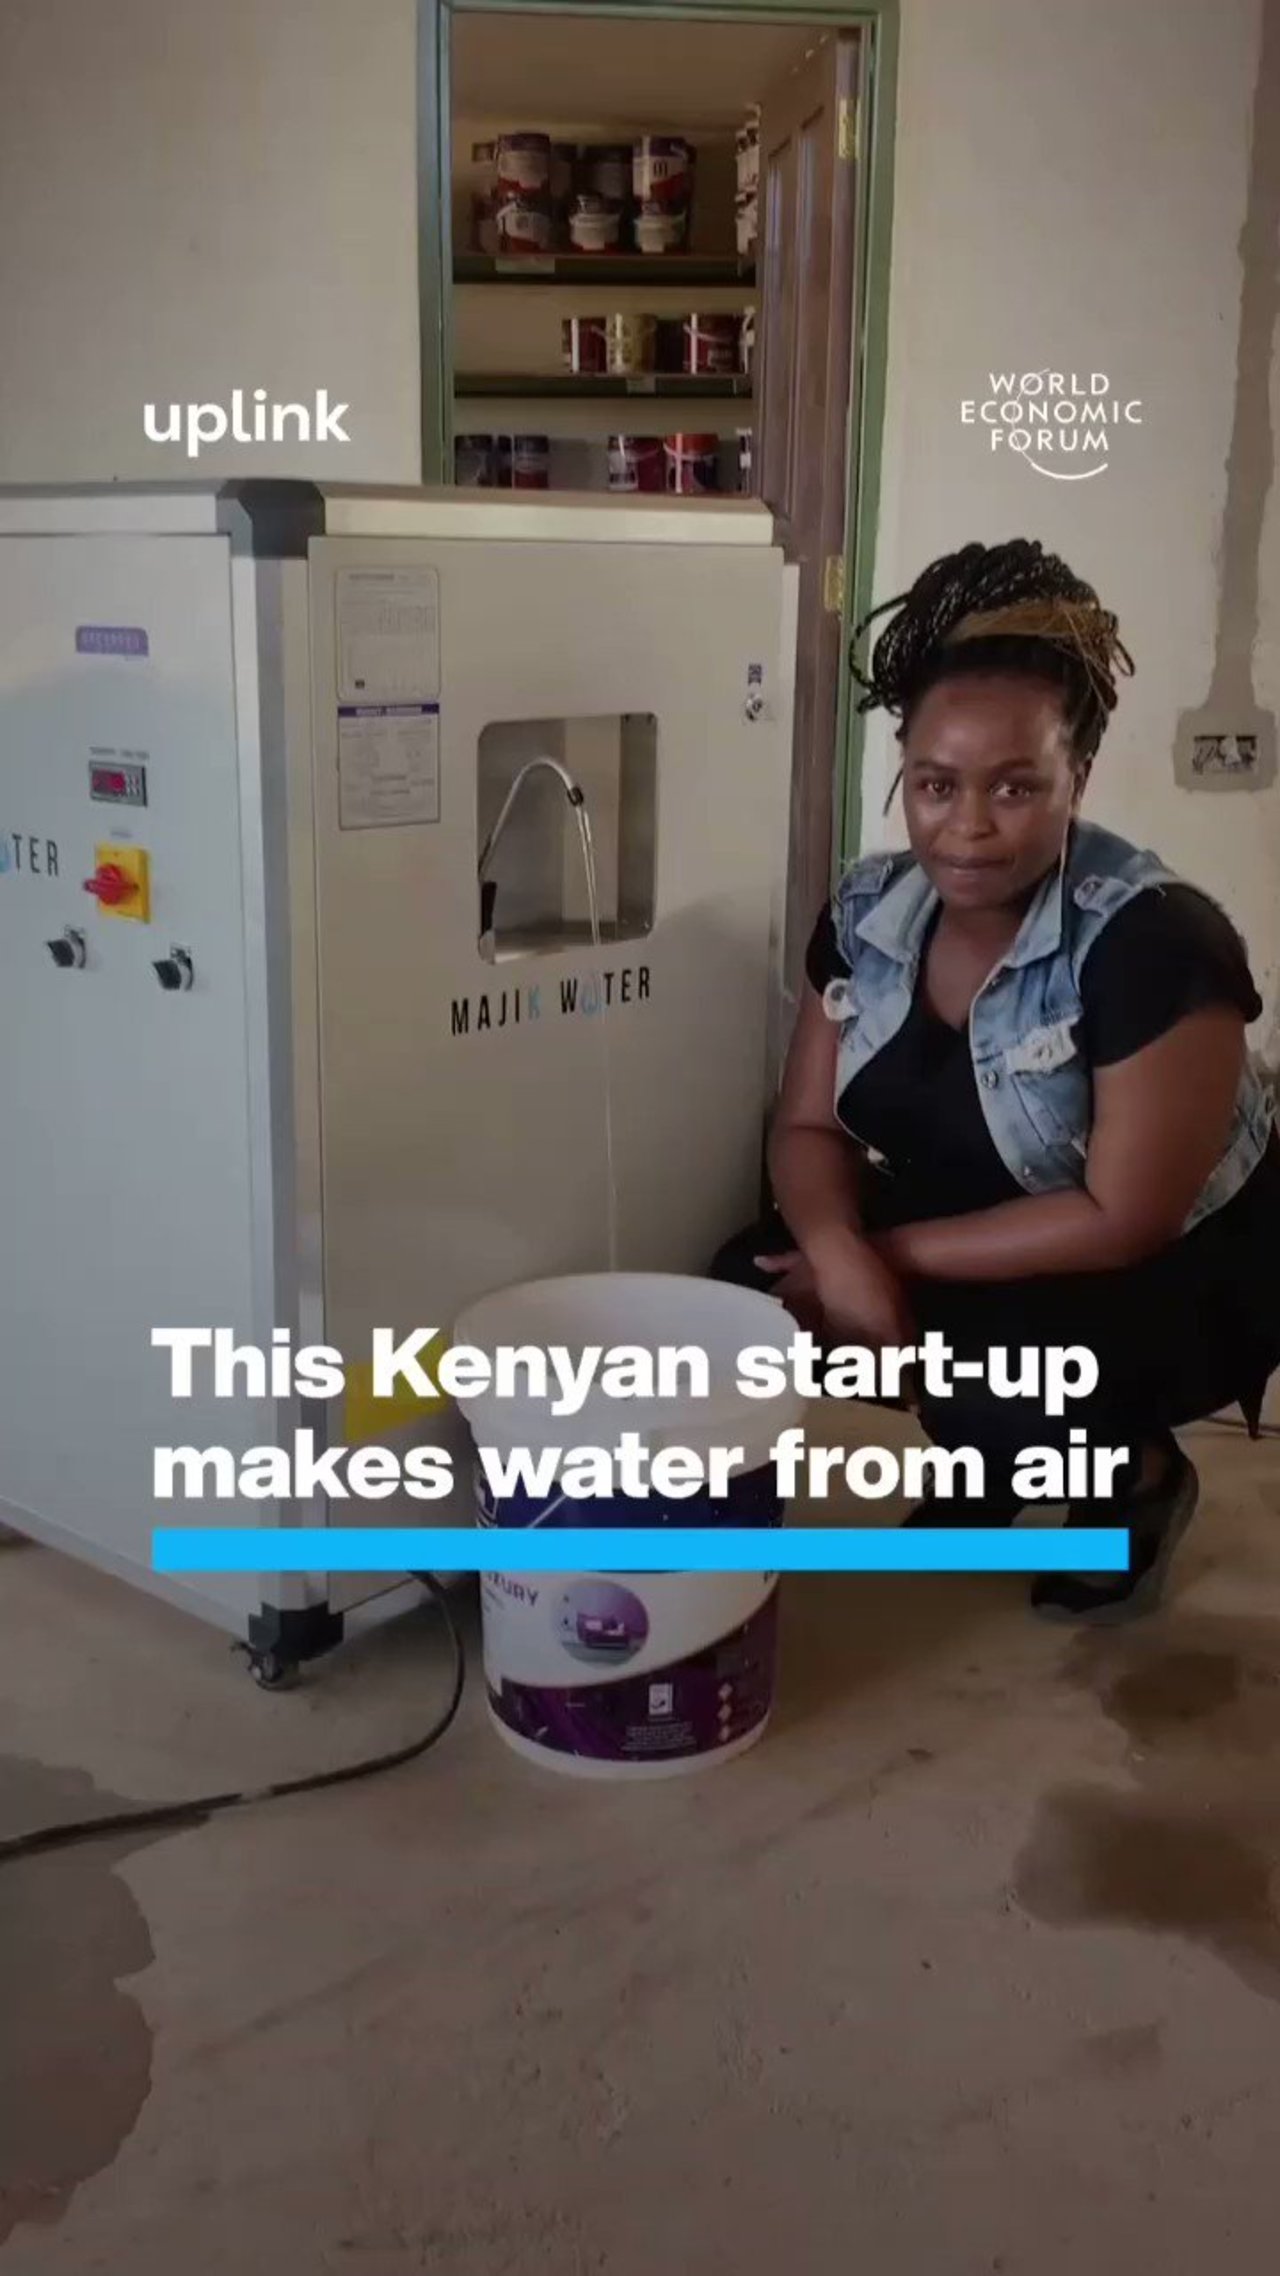 These machines can create clean water from thin air, even in arid regions. #SDGs #TechForGood #innovation #Sustainability Cc: @Khulood_Almani @Shi4Tech @KanezaDiane @CurieuxExplorer @FrRonconi @TheAdityaPatro @anand_narang @mvollmer1 @chboursin @jblefevre60 @Nicochan33 @kalydeoo https://t.co/qca6pGXZFX